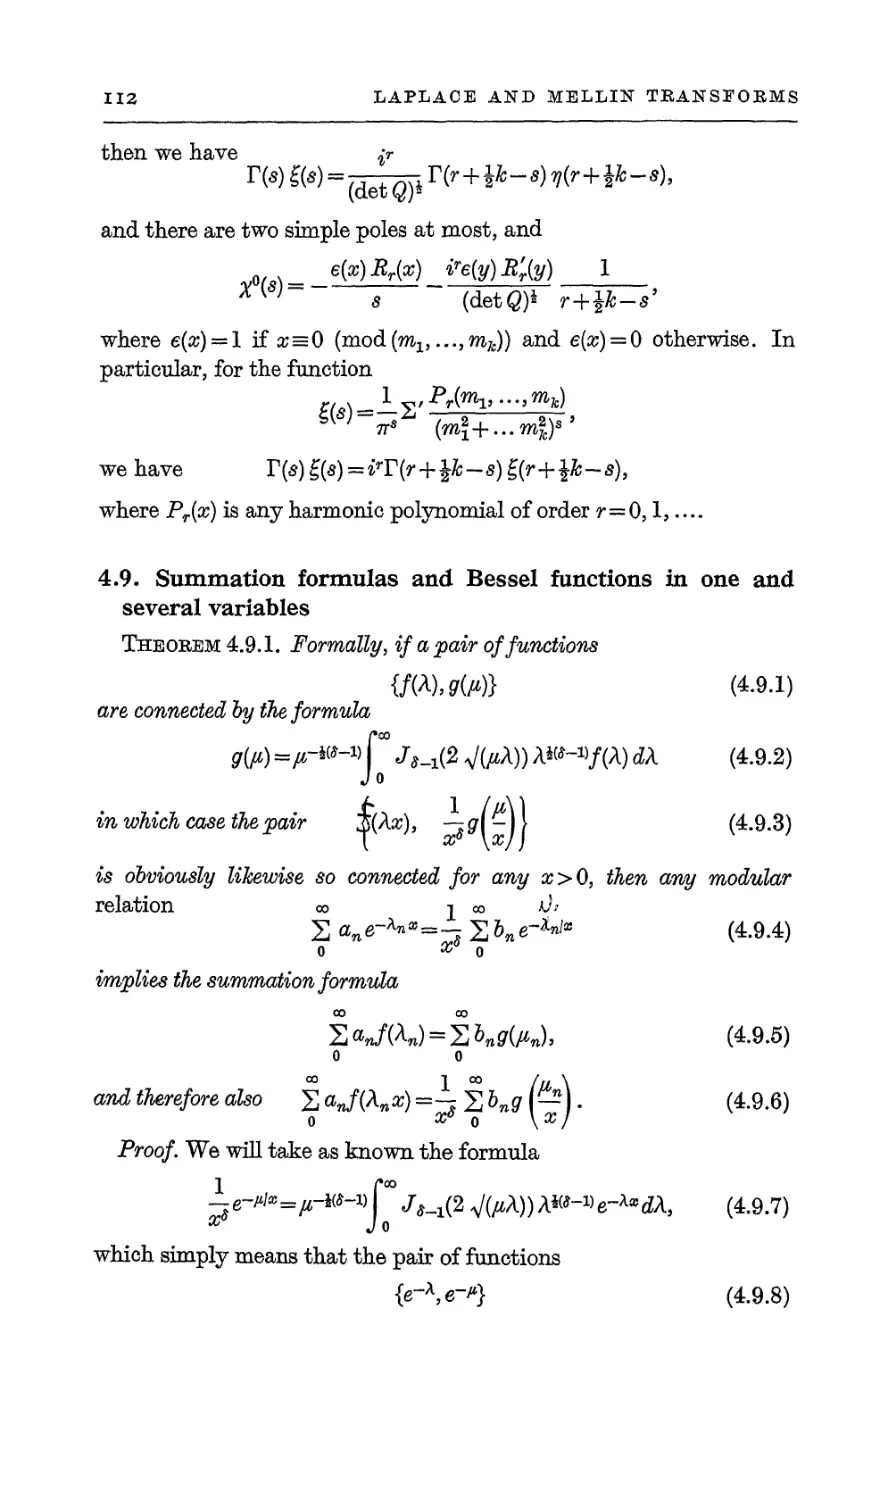 4.9. Summation formulas and Bessel functions in one and several variables